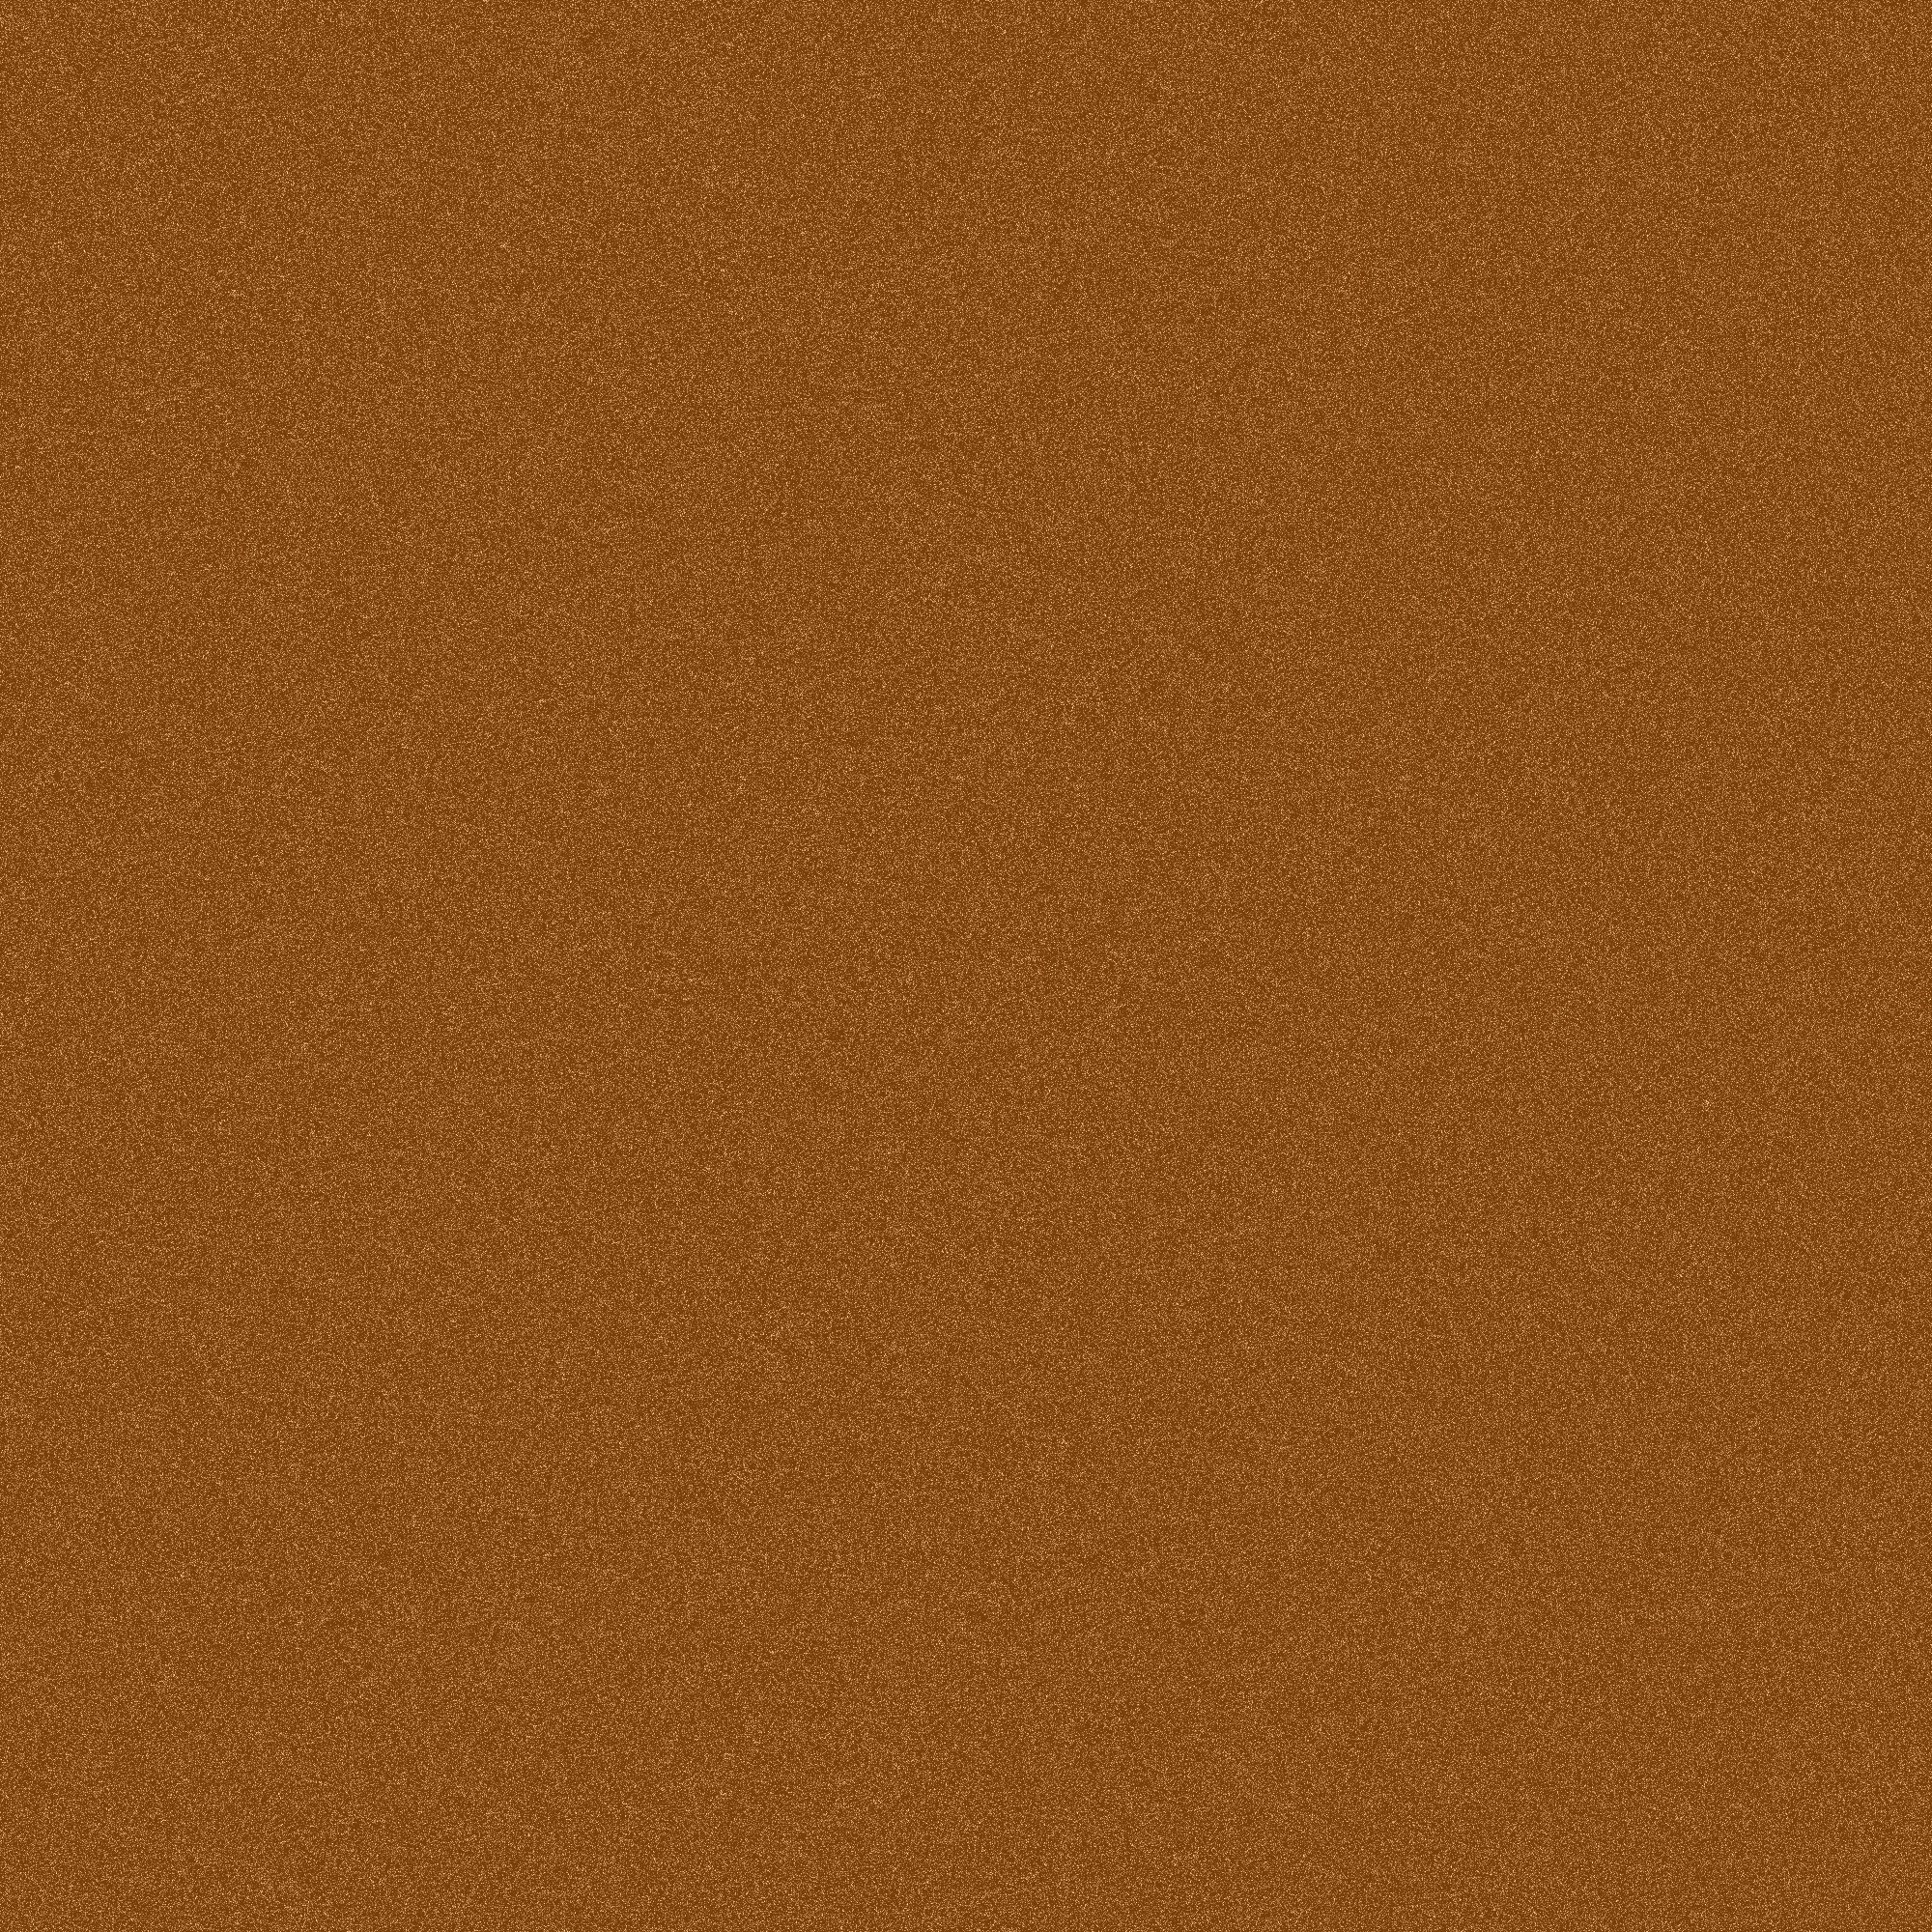 noize_background_brown